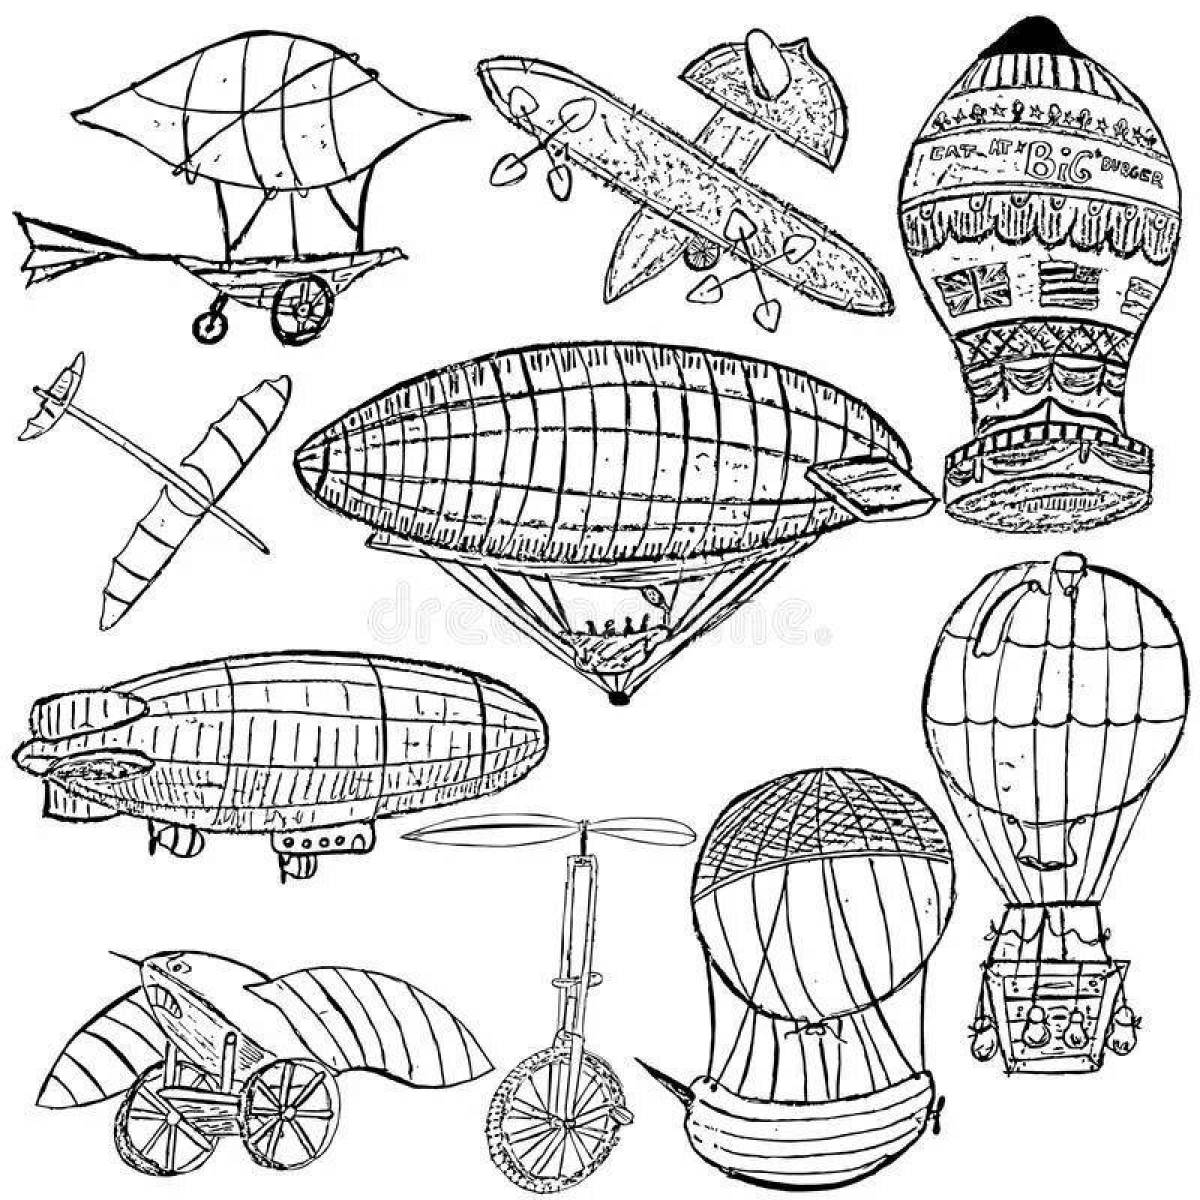 Impressive aircraft coloring page